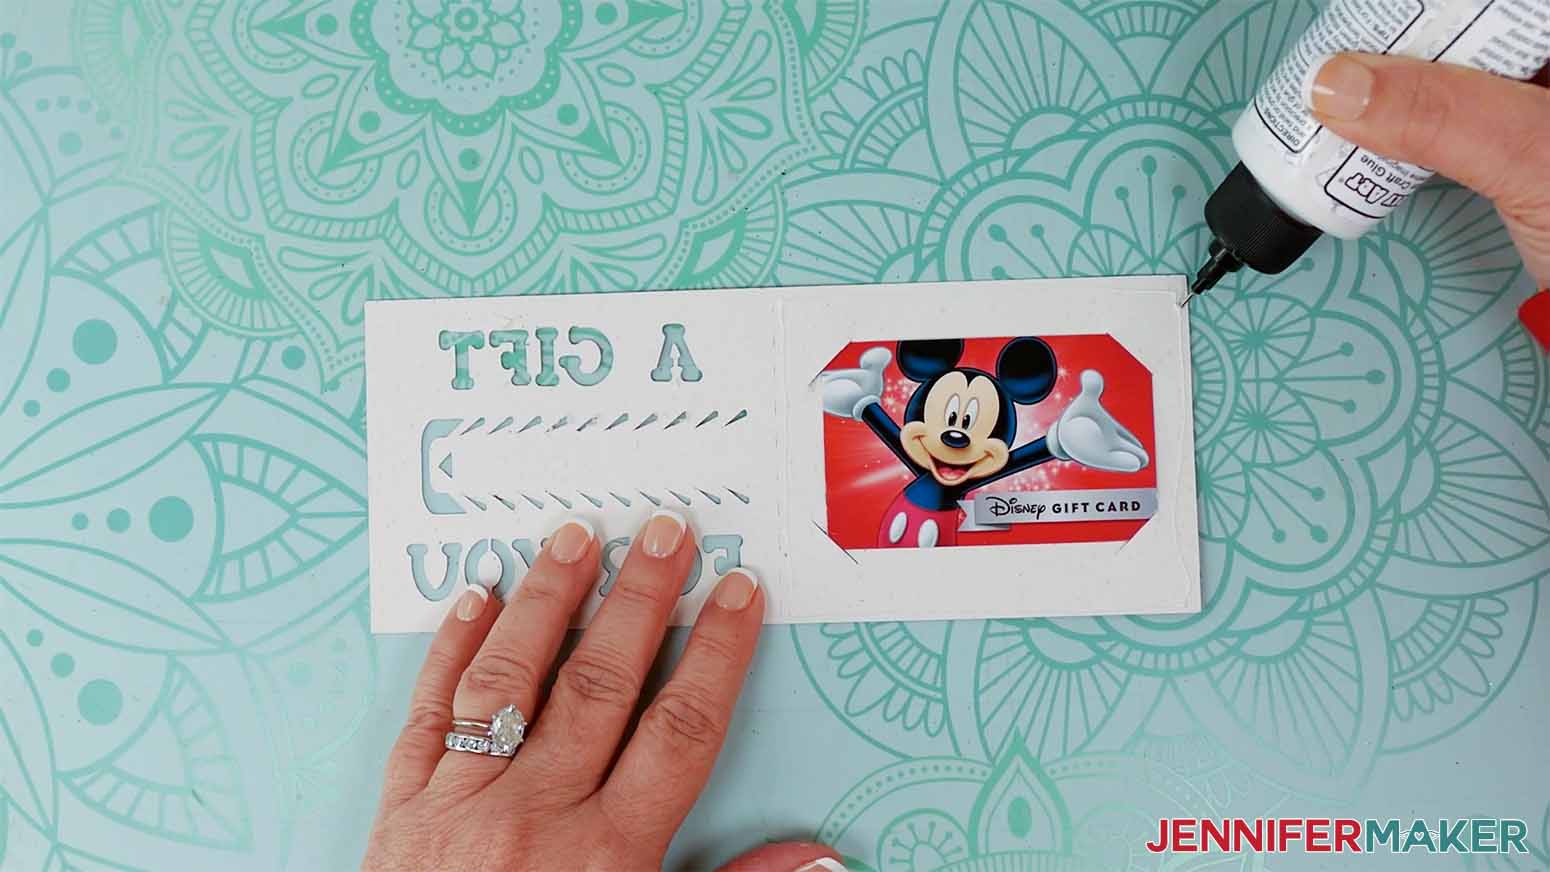 Apply a thin line of craft glue around the edge of the gift card envelope.